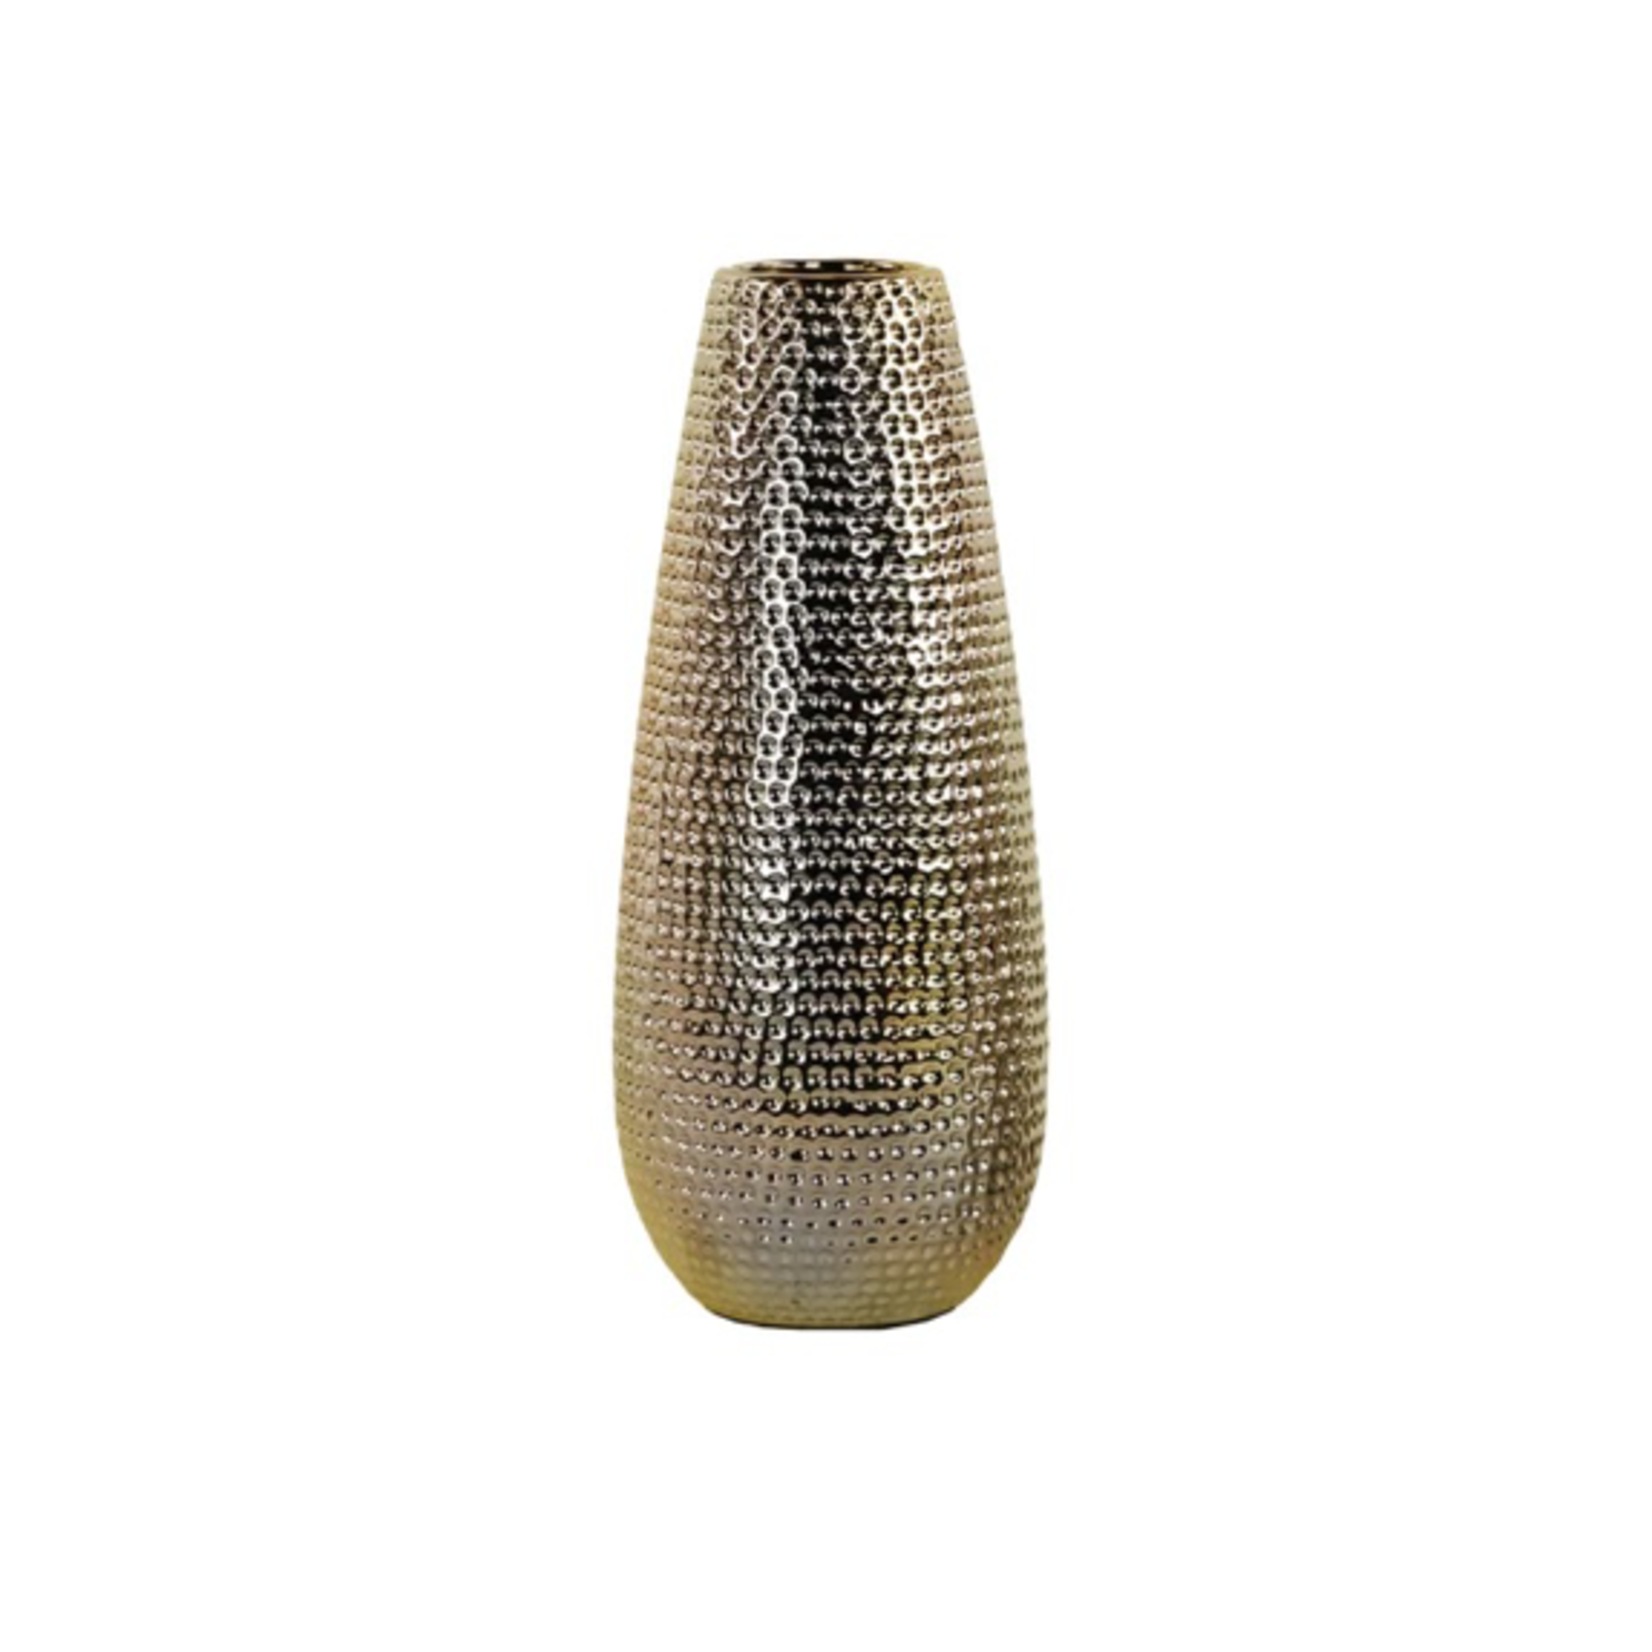 40% OFF WAS $39 NOW 27.29. 13”H X 5.5” POLISHED GOLD CERAMIC DIMPLE TAPERED CYLINDER